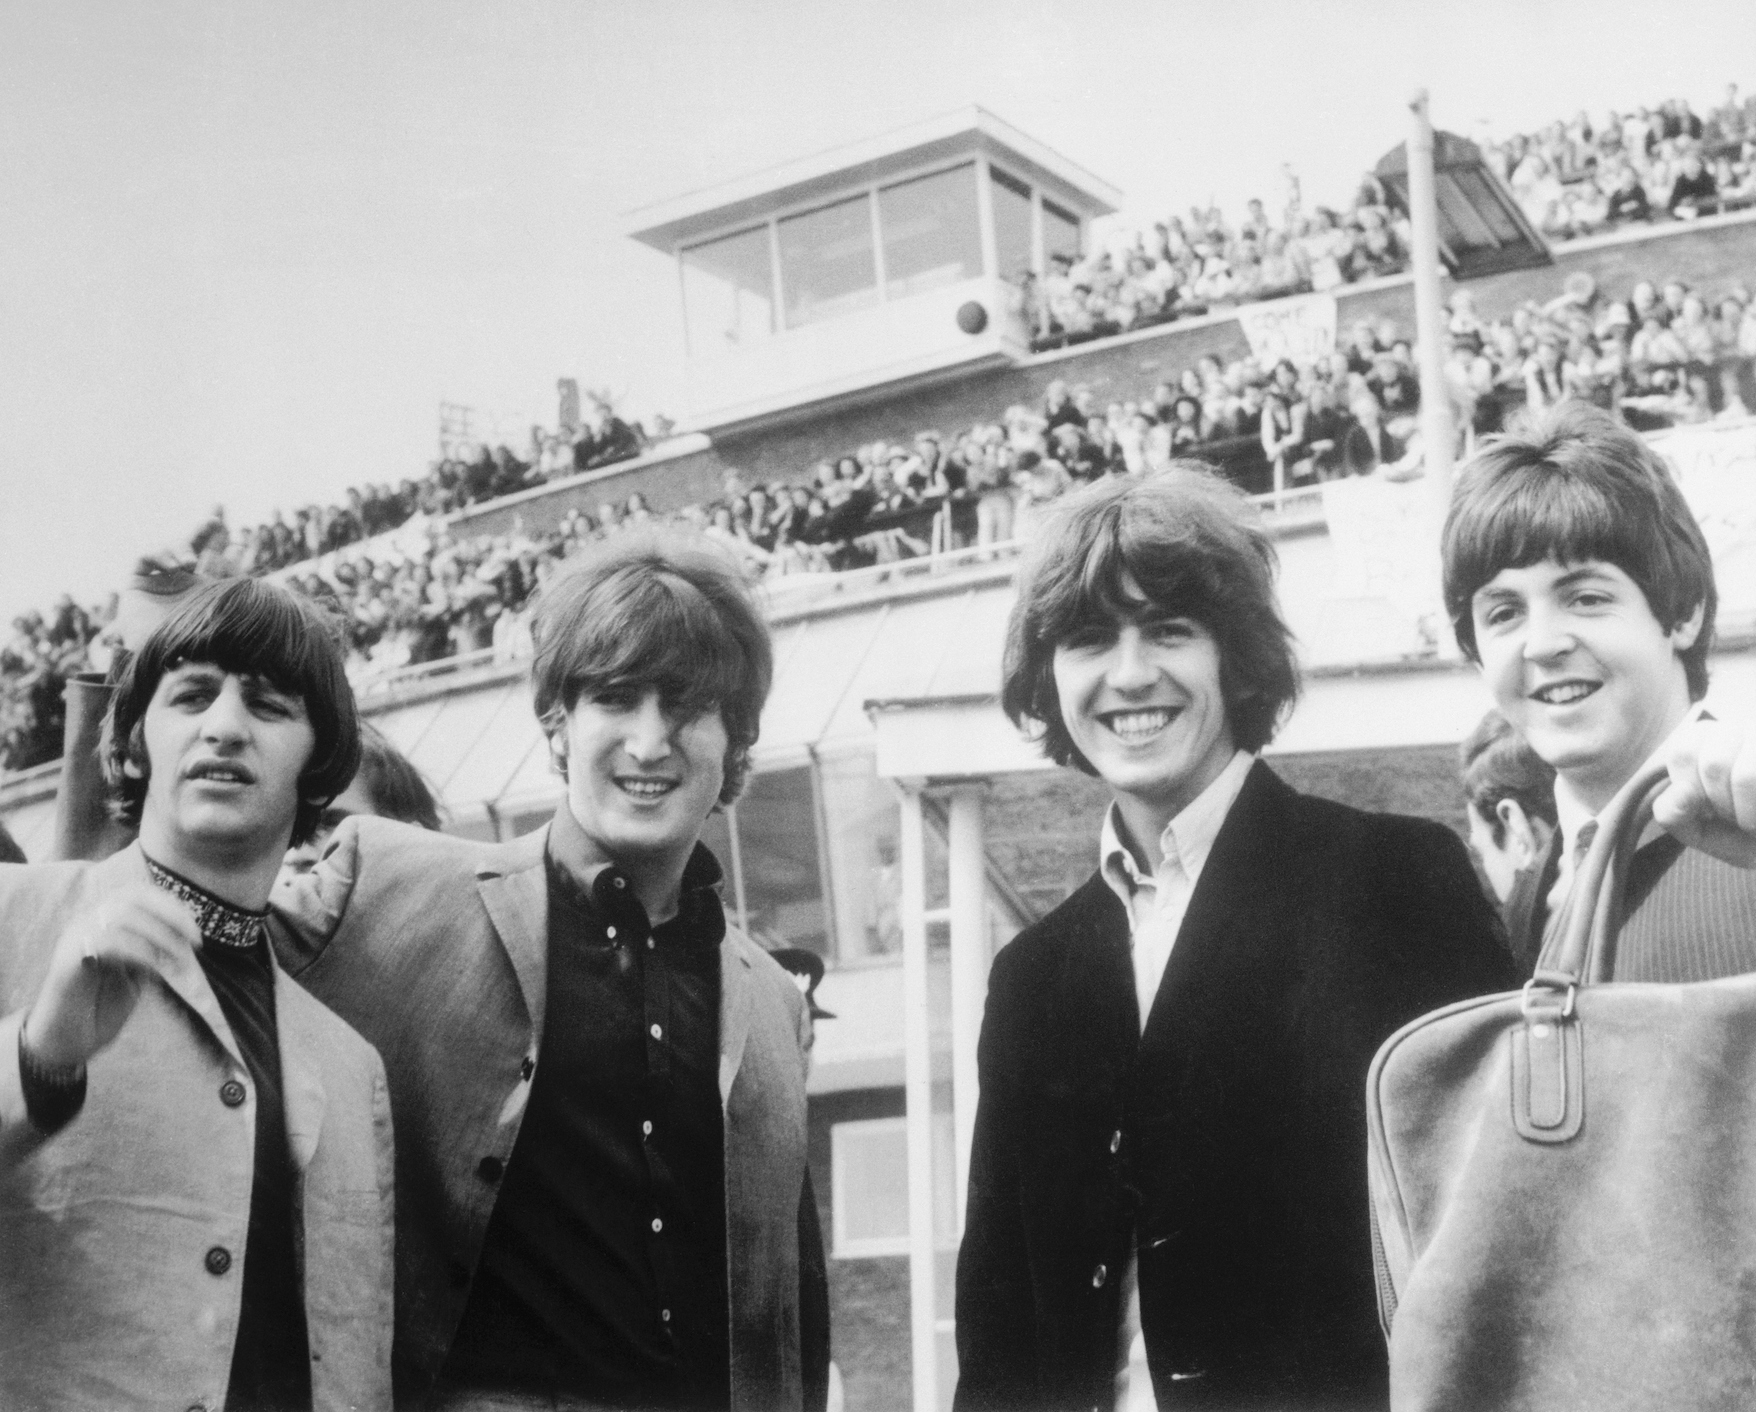 The Beatles (Ringo Starr, John Lennon, George Harrison, and Paul McCartney) pose in front of fans at London airport